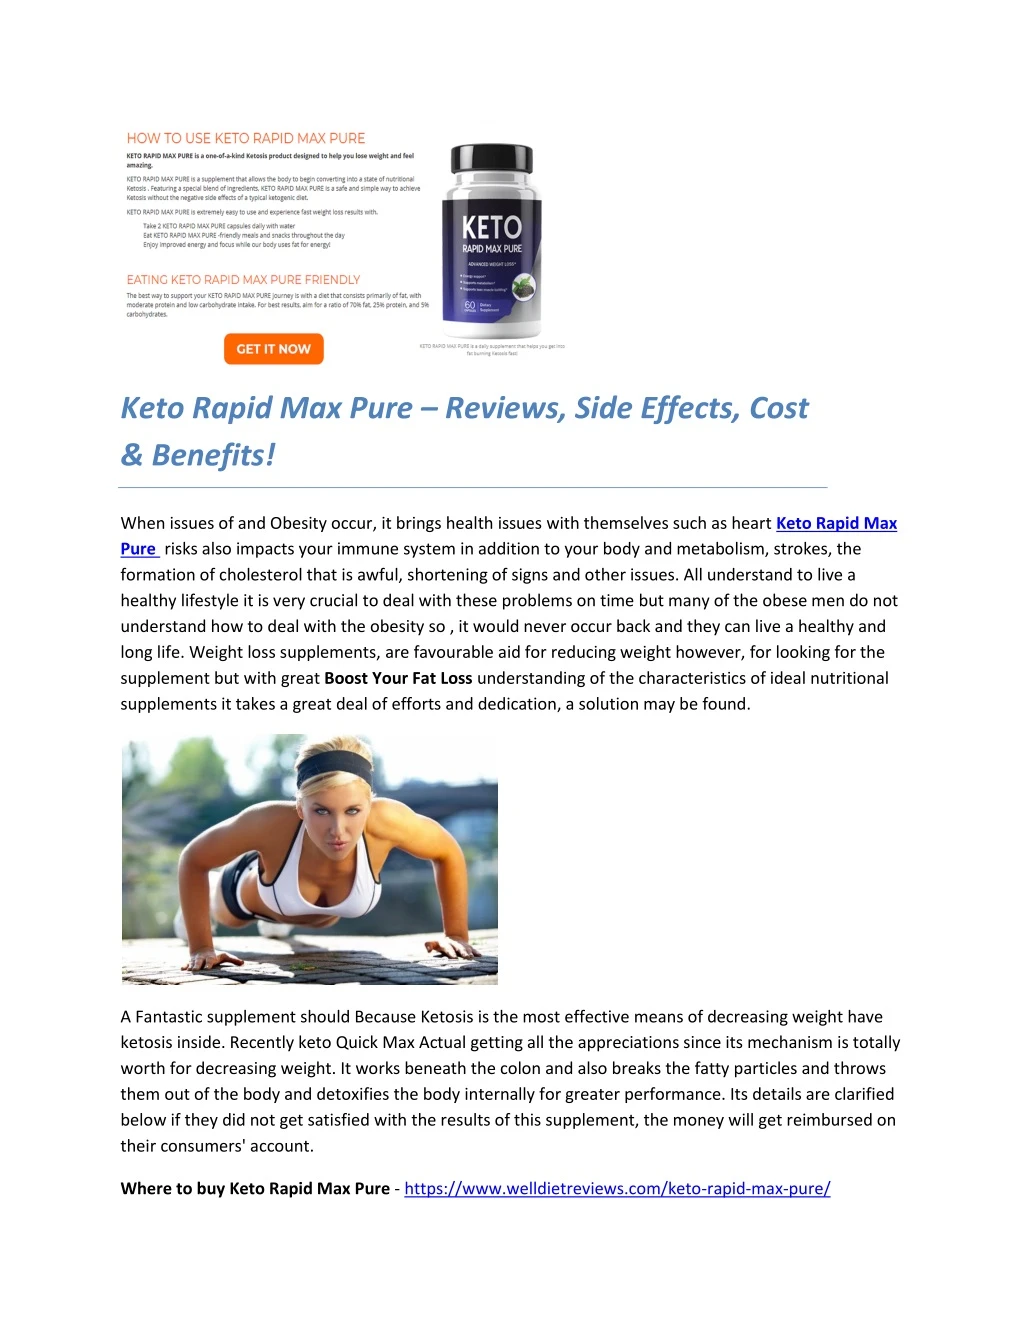 keto rapid max pure reviews side effects cost